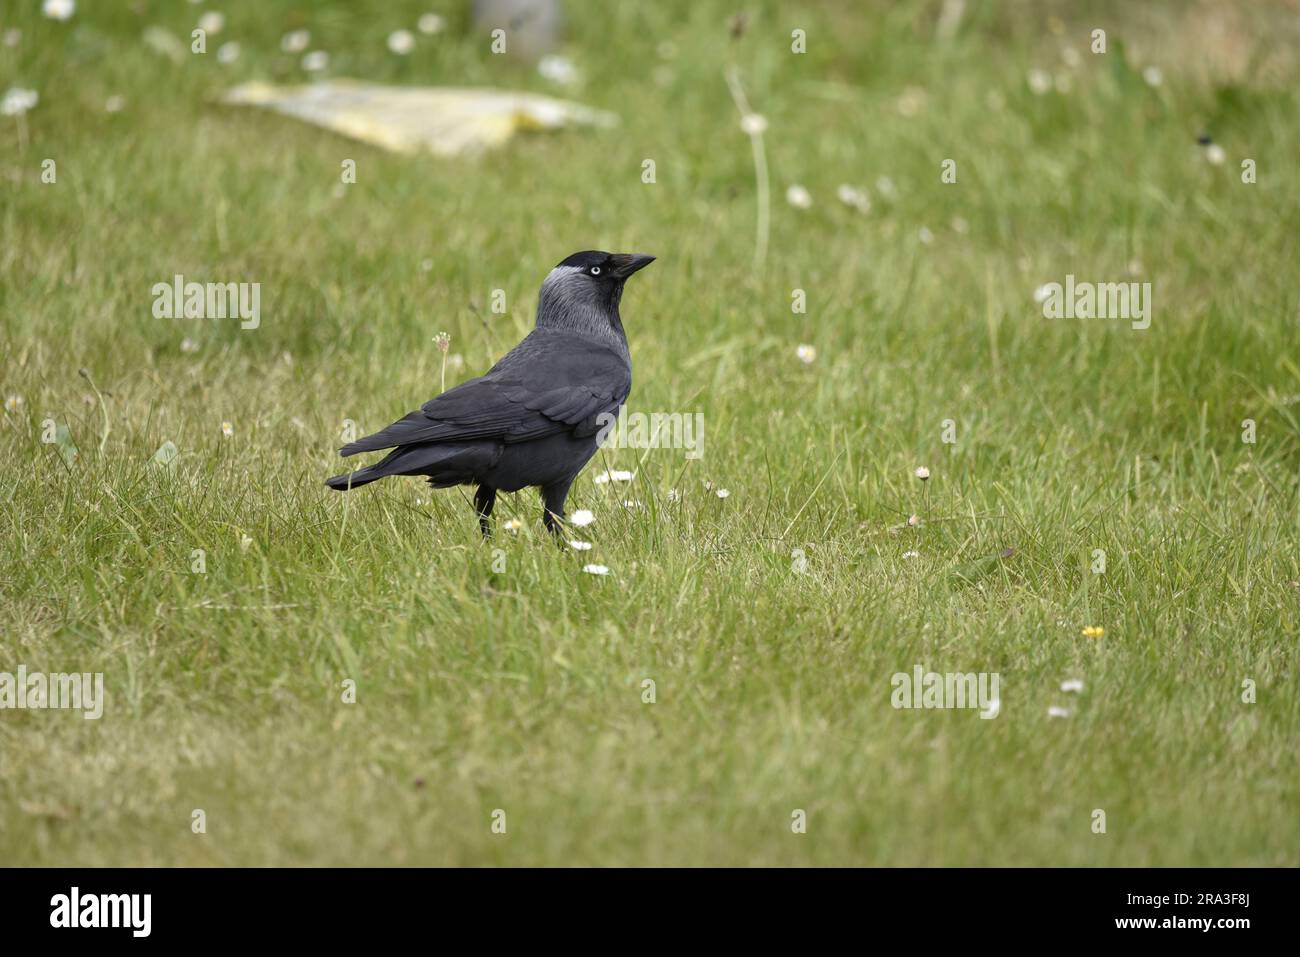 Western Jackdaw (Corvus monedula) Standing in Right-Profile on Grass with Daisies and Buttercups, Looking Skywards, taken on the Isle of Man in June Stock Photo